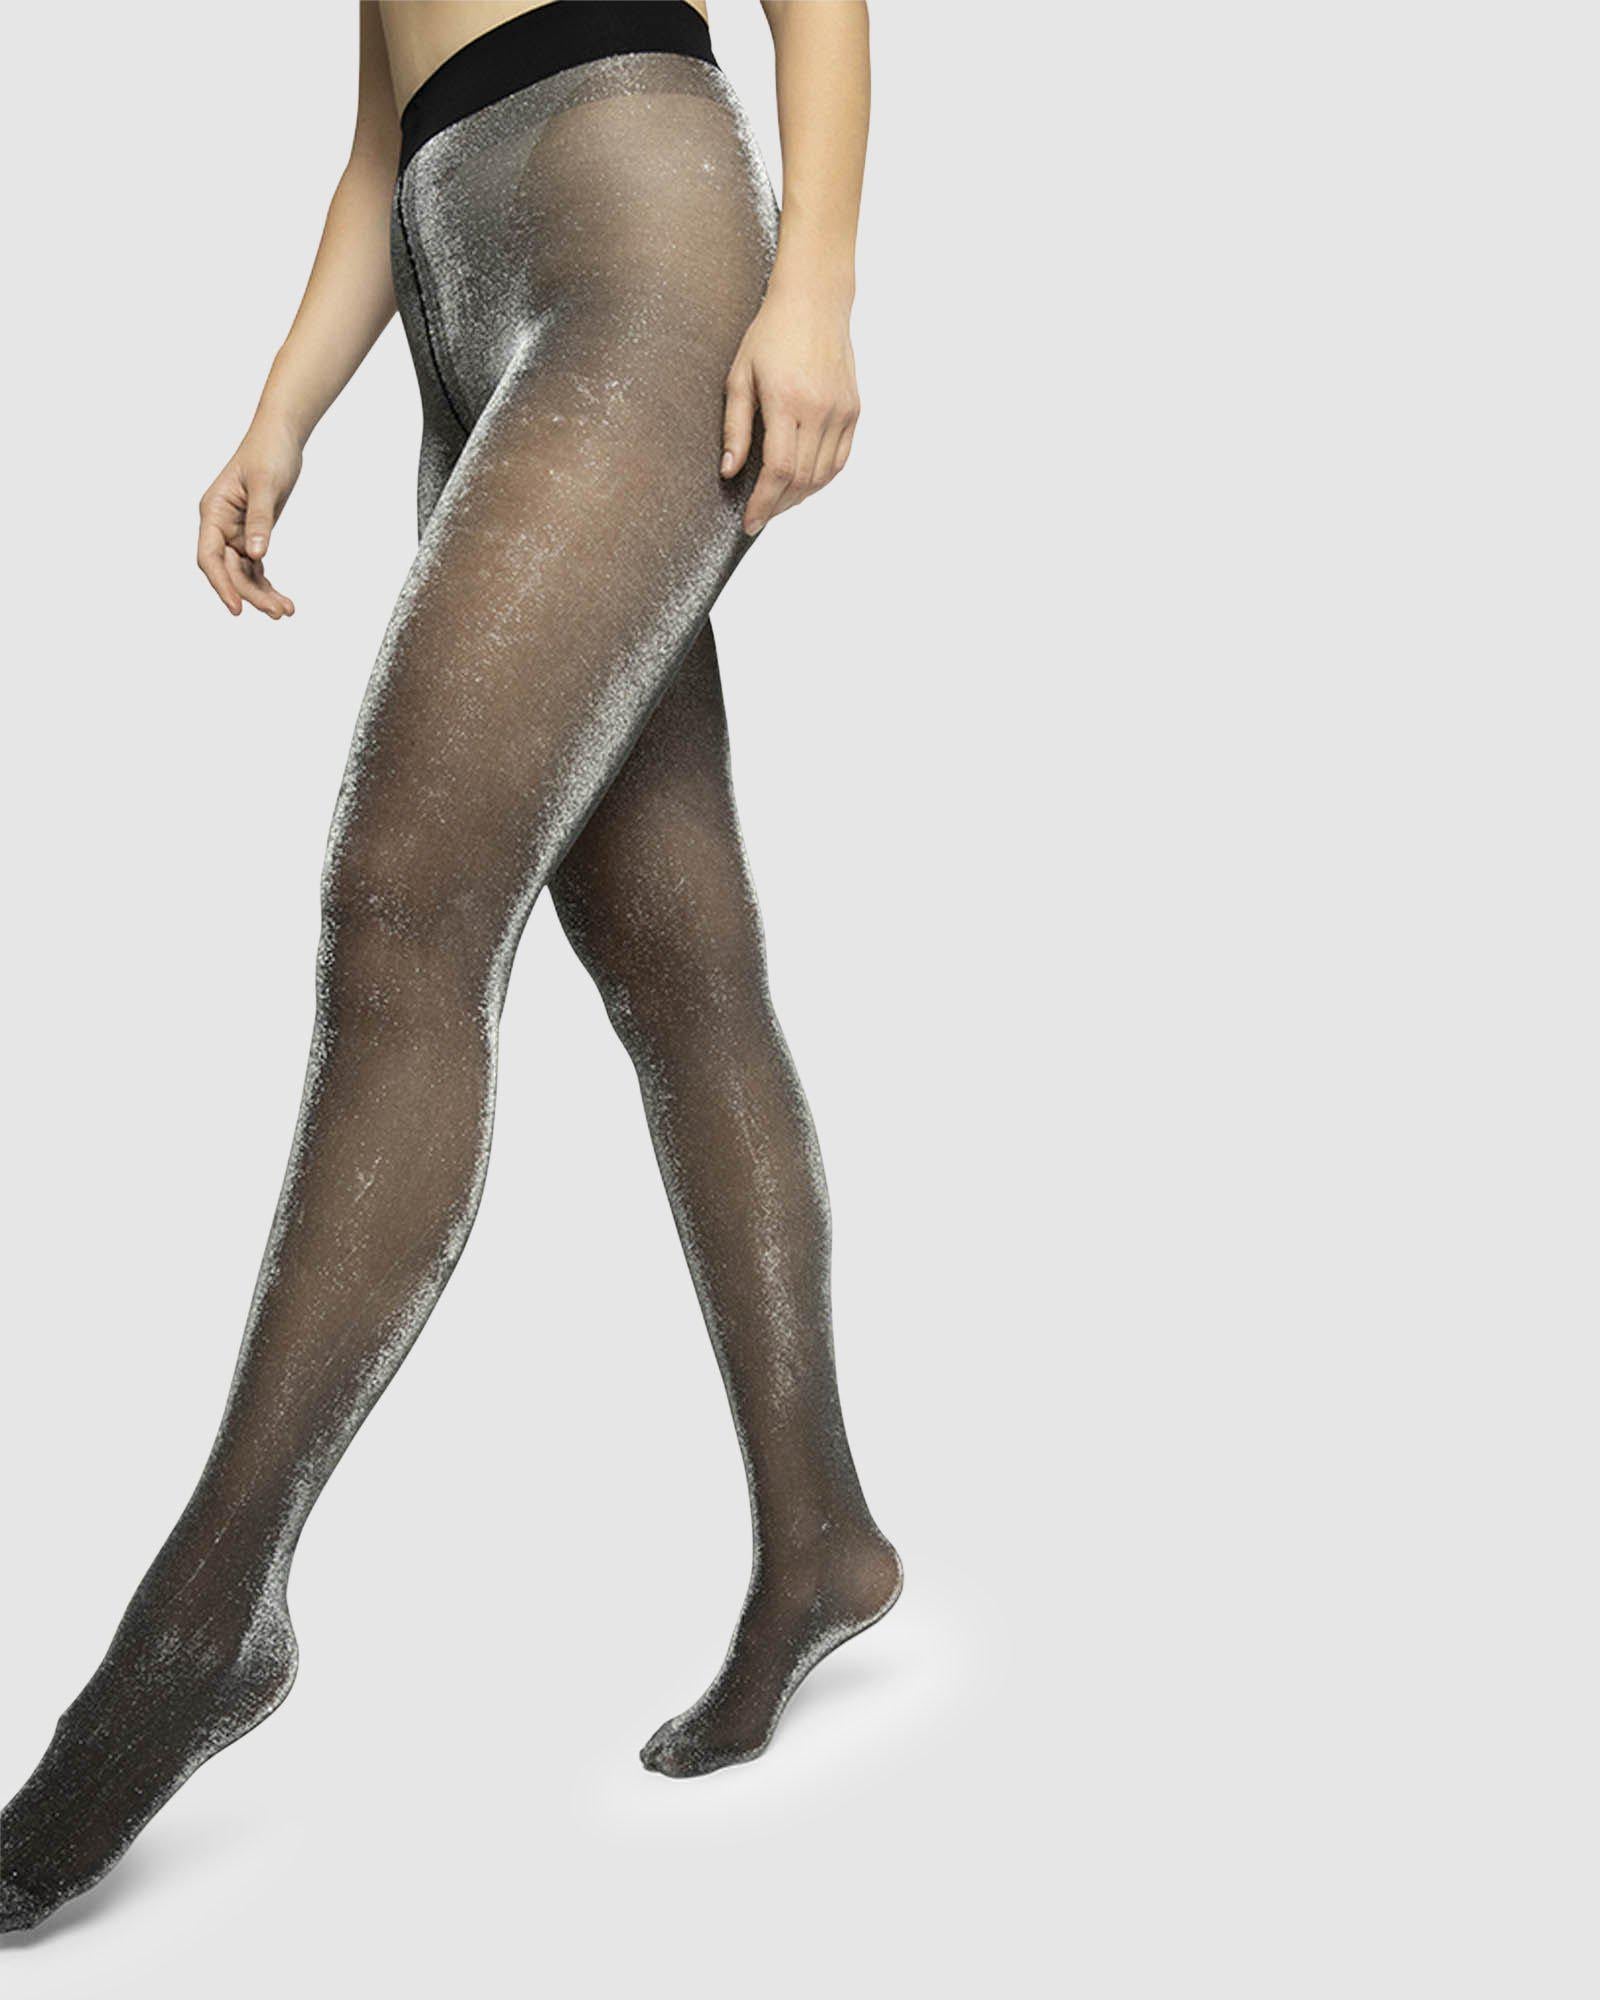 Shimmer Glitter Tights for Women Metallic Sparkle Tights Shiny Pantyhose